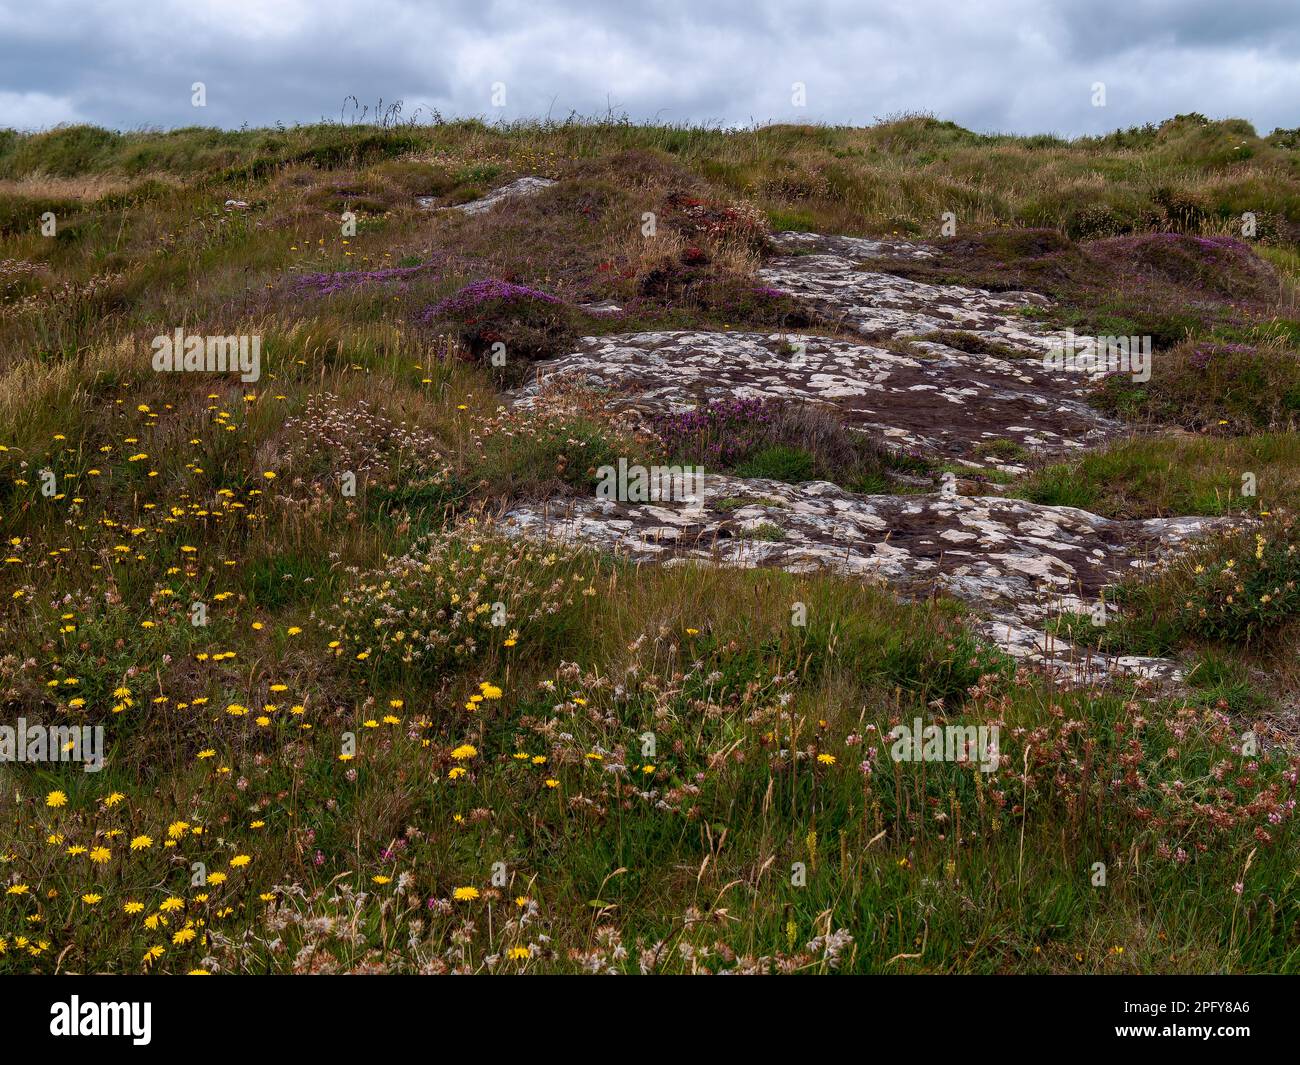 Colorful flowers grow on stony Irish soil, picturesque landscape. Beautiful plants common in southern Ireland. Northern European vegetation. Stock Photo